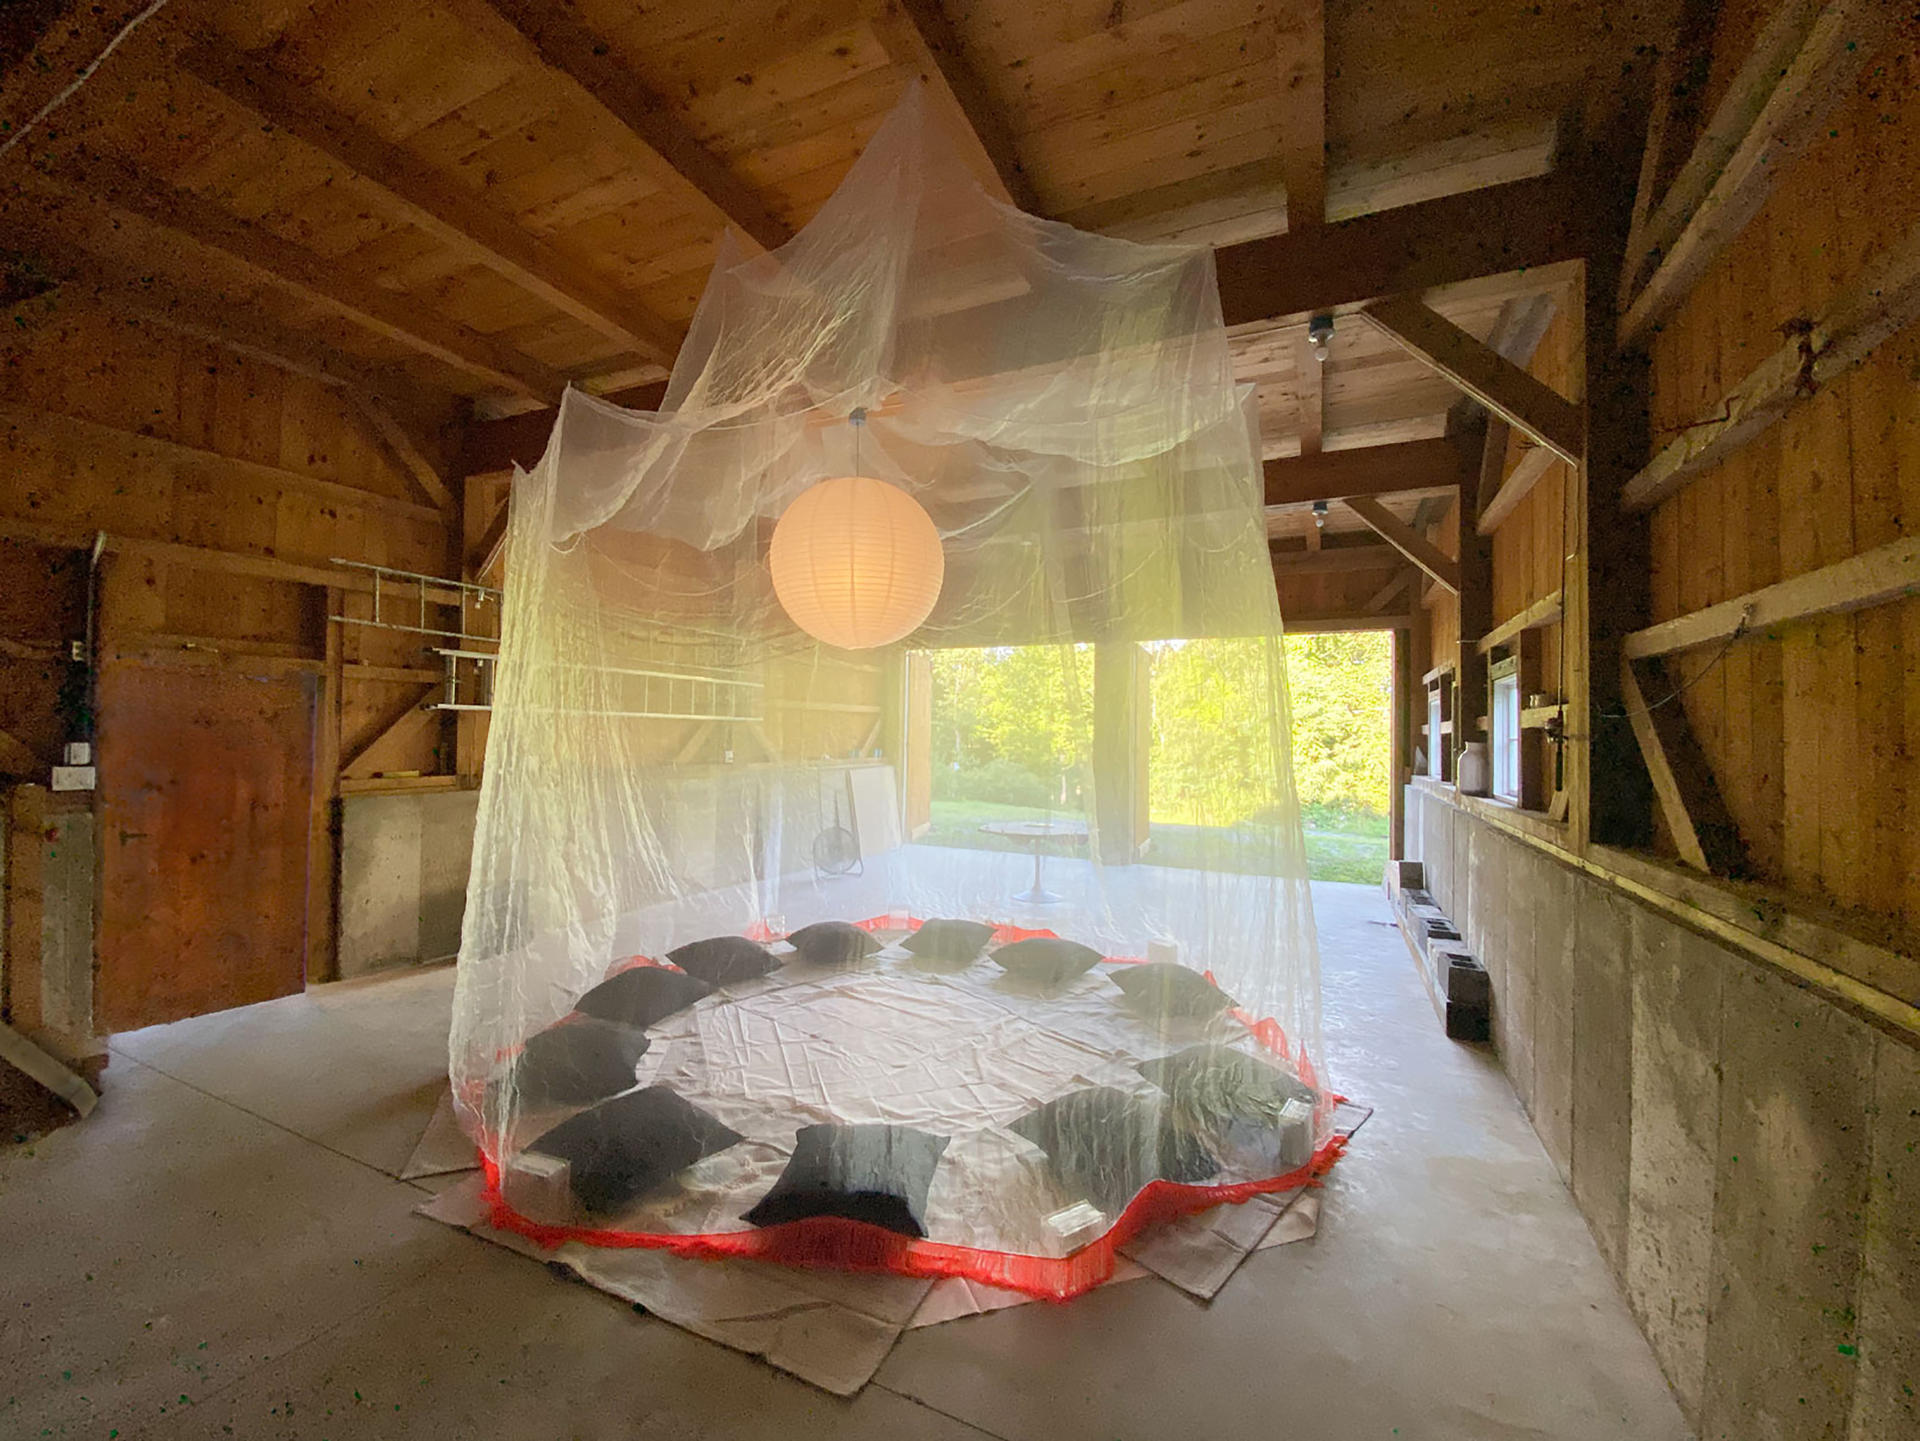 The interior of a barn with a large circular mosquito net hanging from the ceiling